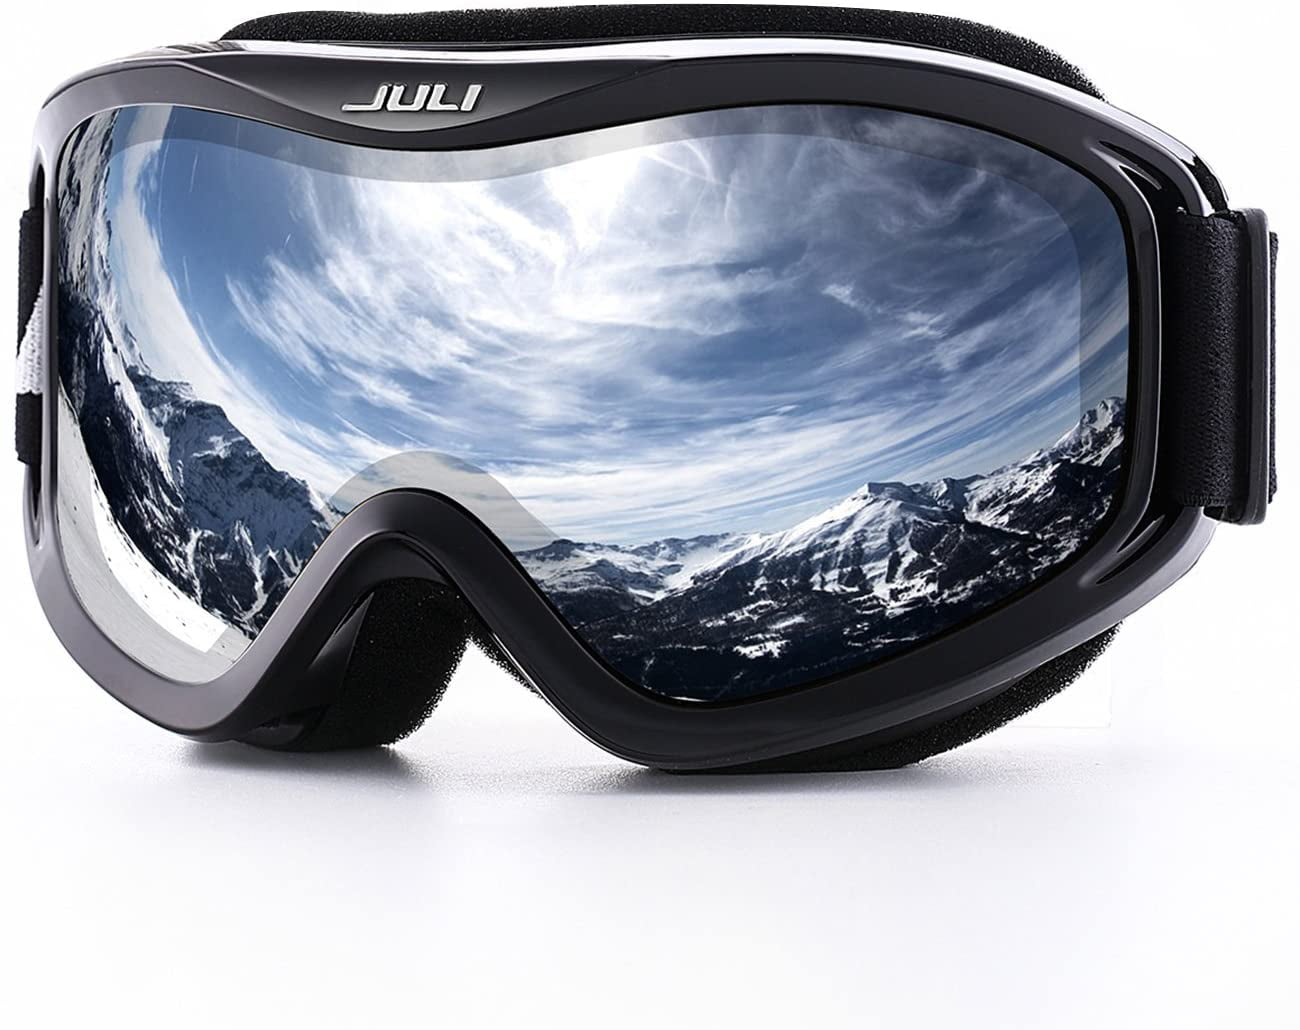 Ski Goggles Winter Snow Sports Goggles With Anti-fog UV Protection For Skiing 